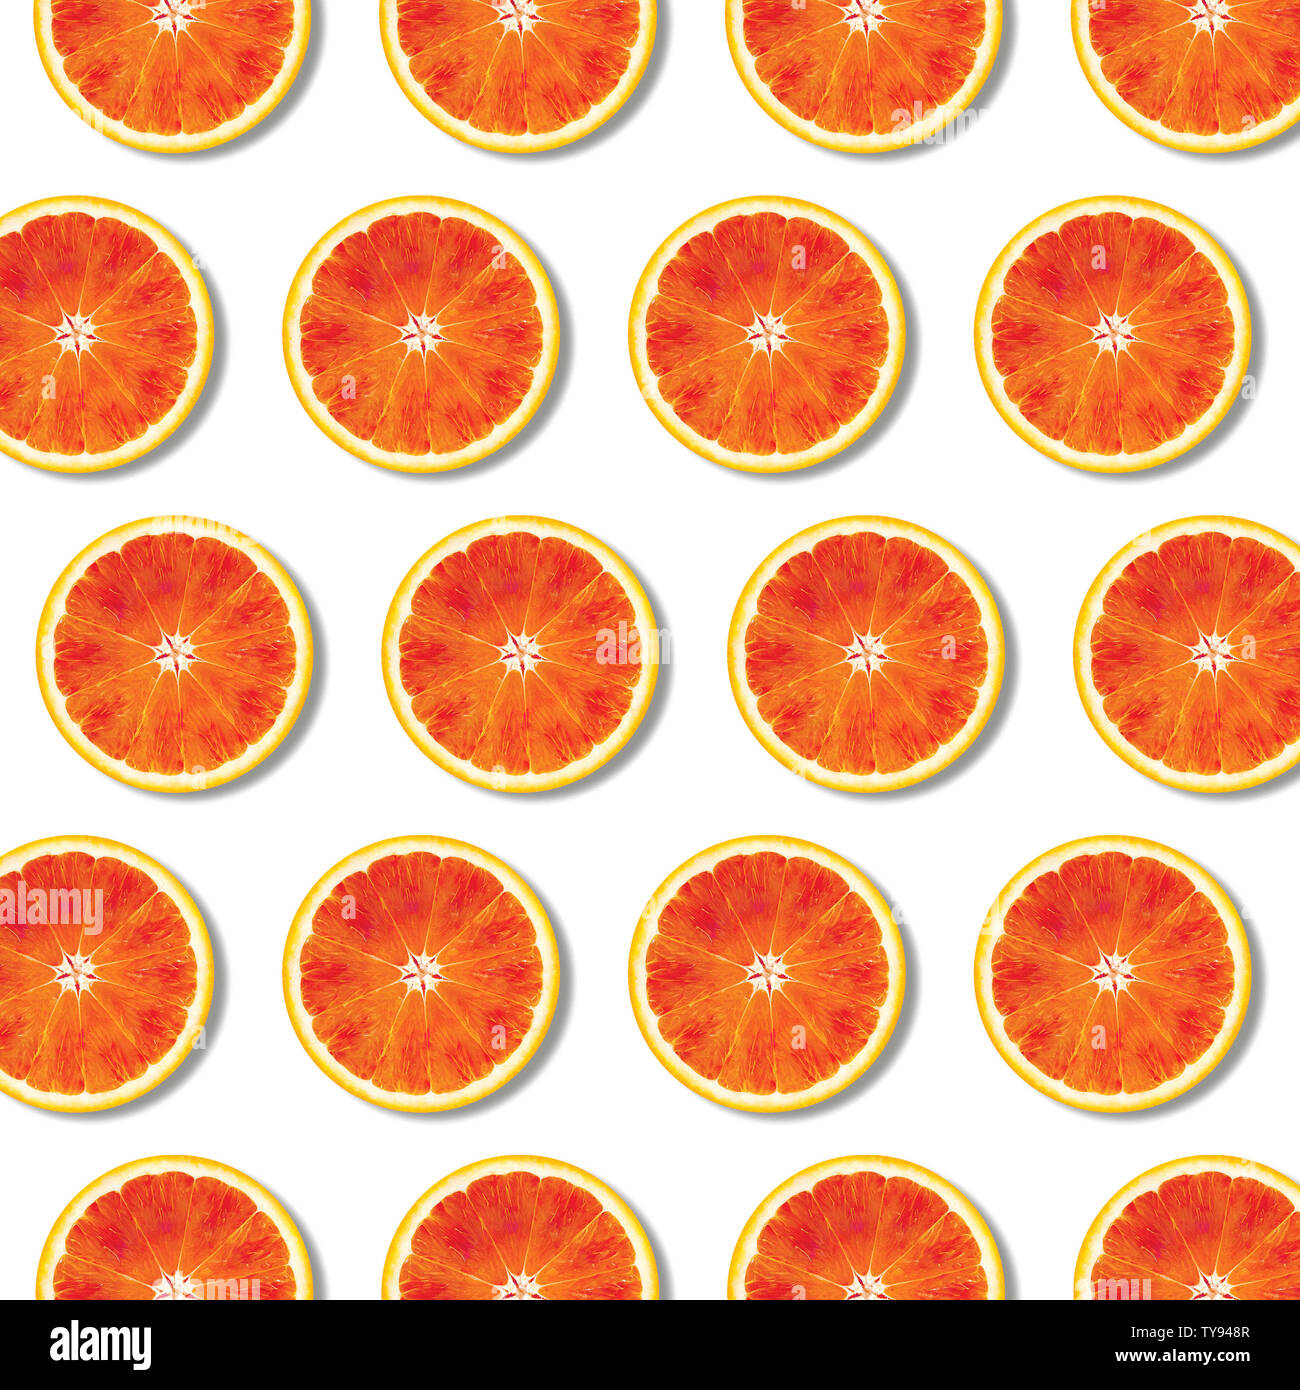 Red orange fruit slices pattern on white background. Minimal flat lay top view food texture Stock Photo